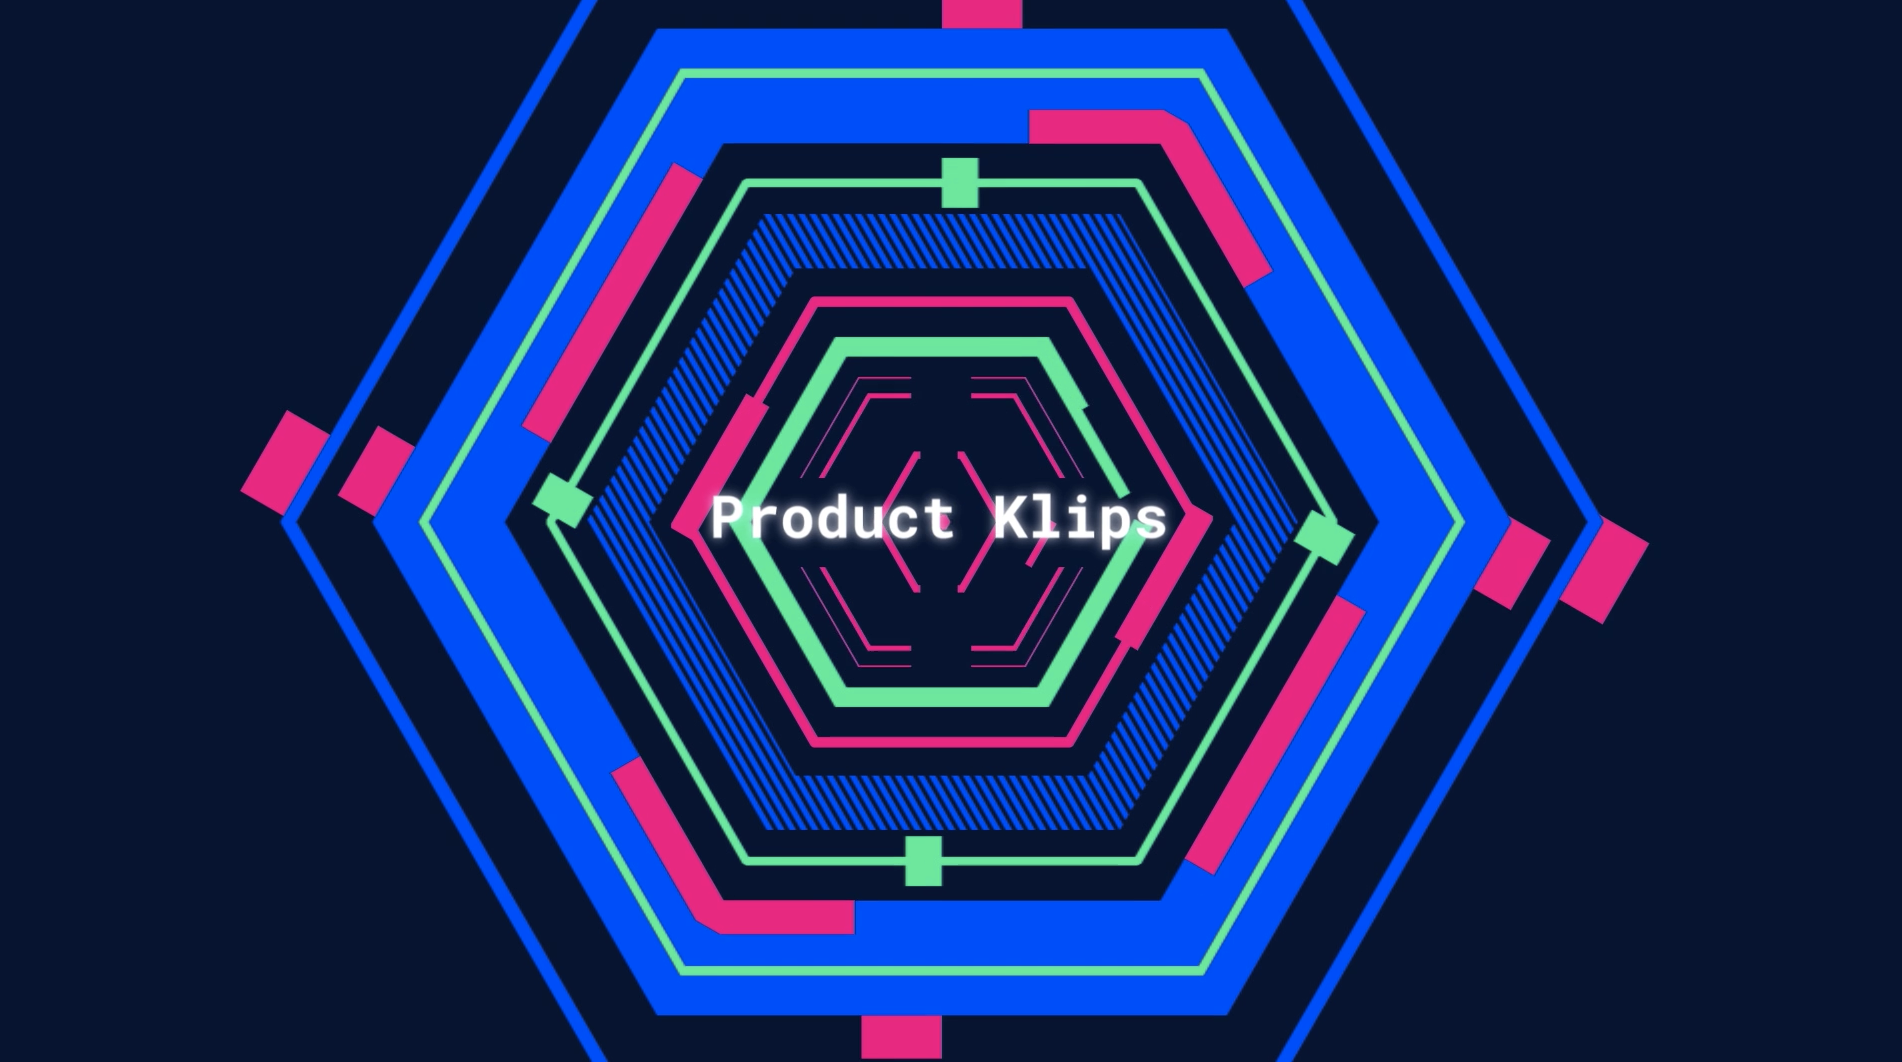 Product Klips: Bite-Sized Feature Overviews